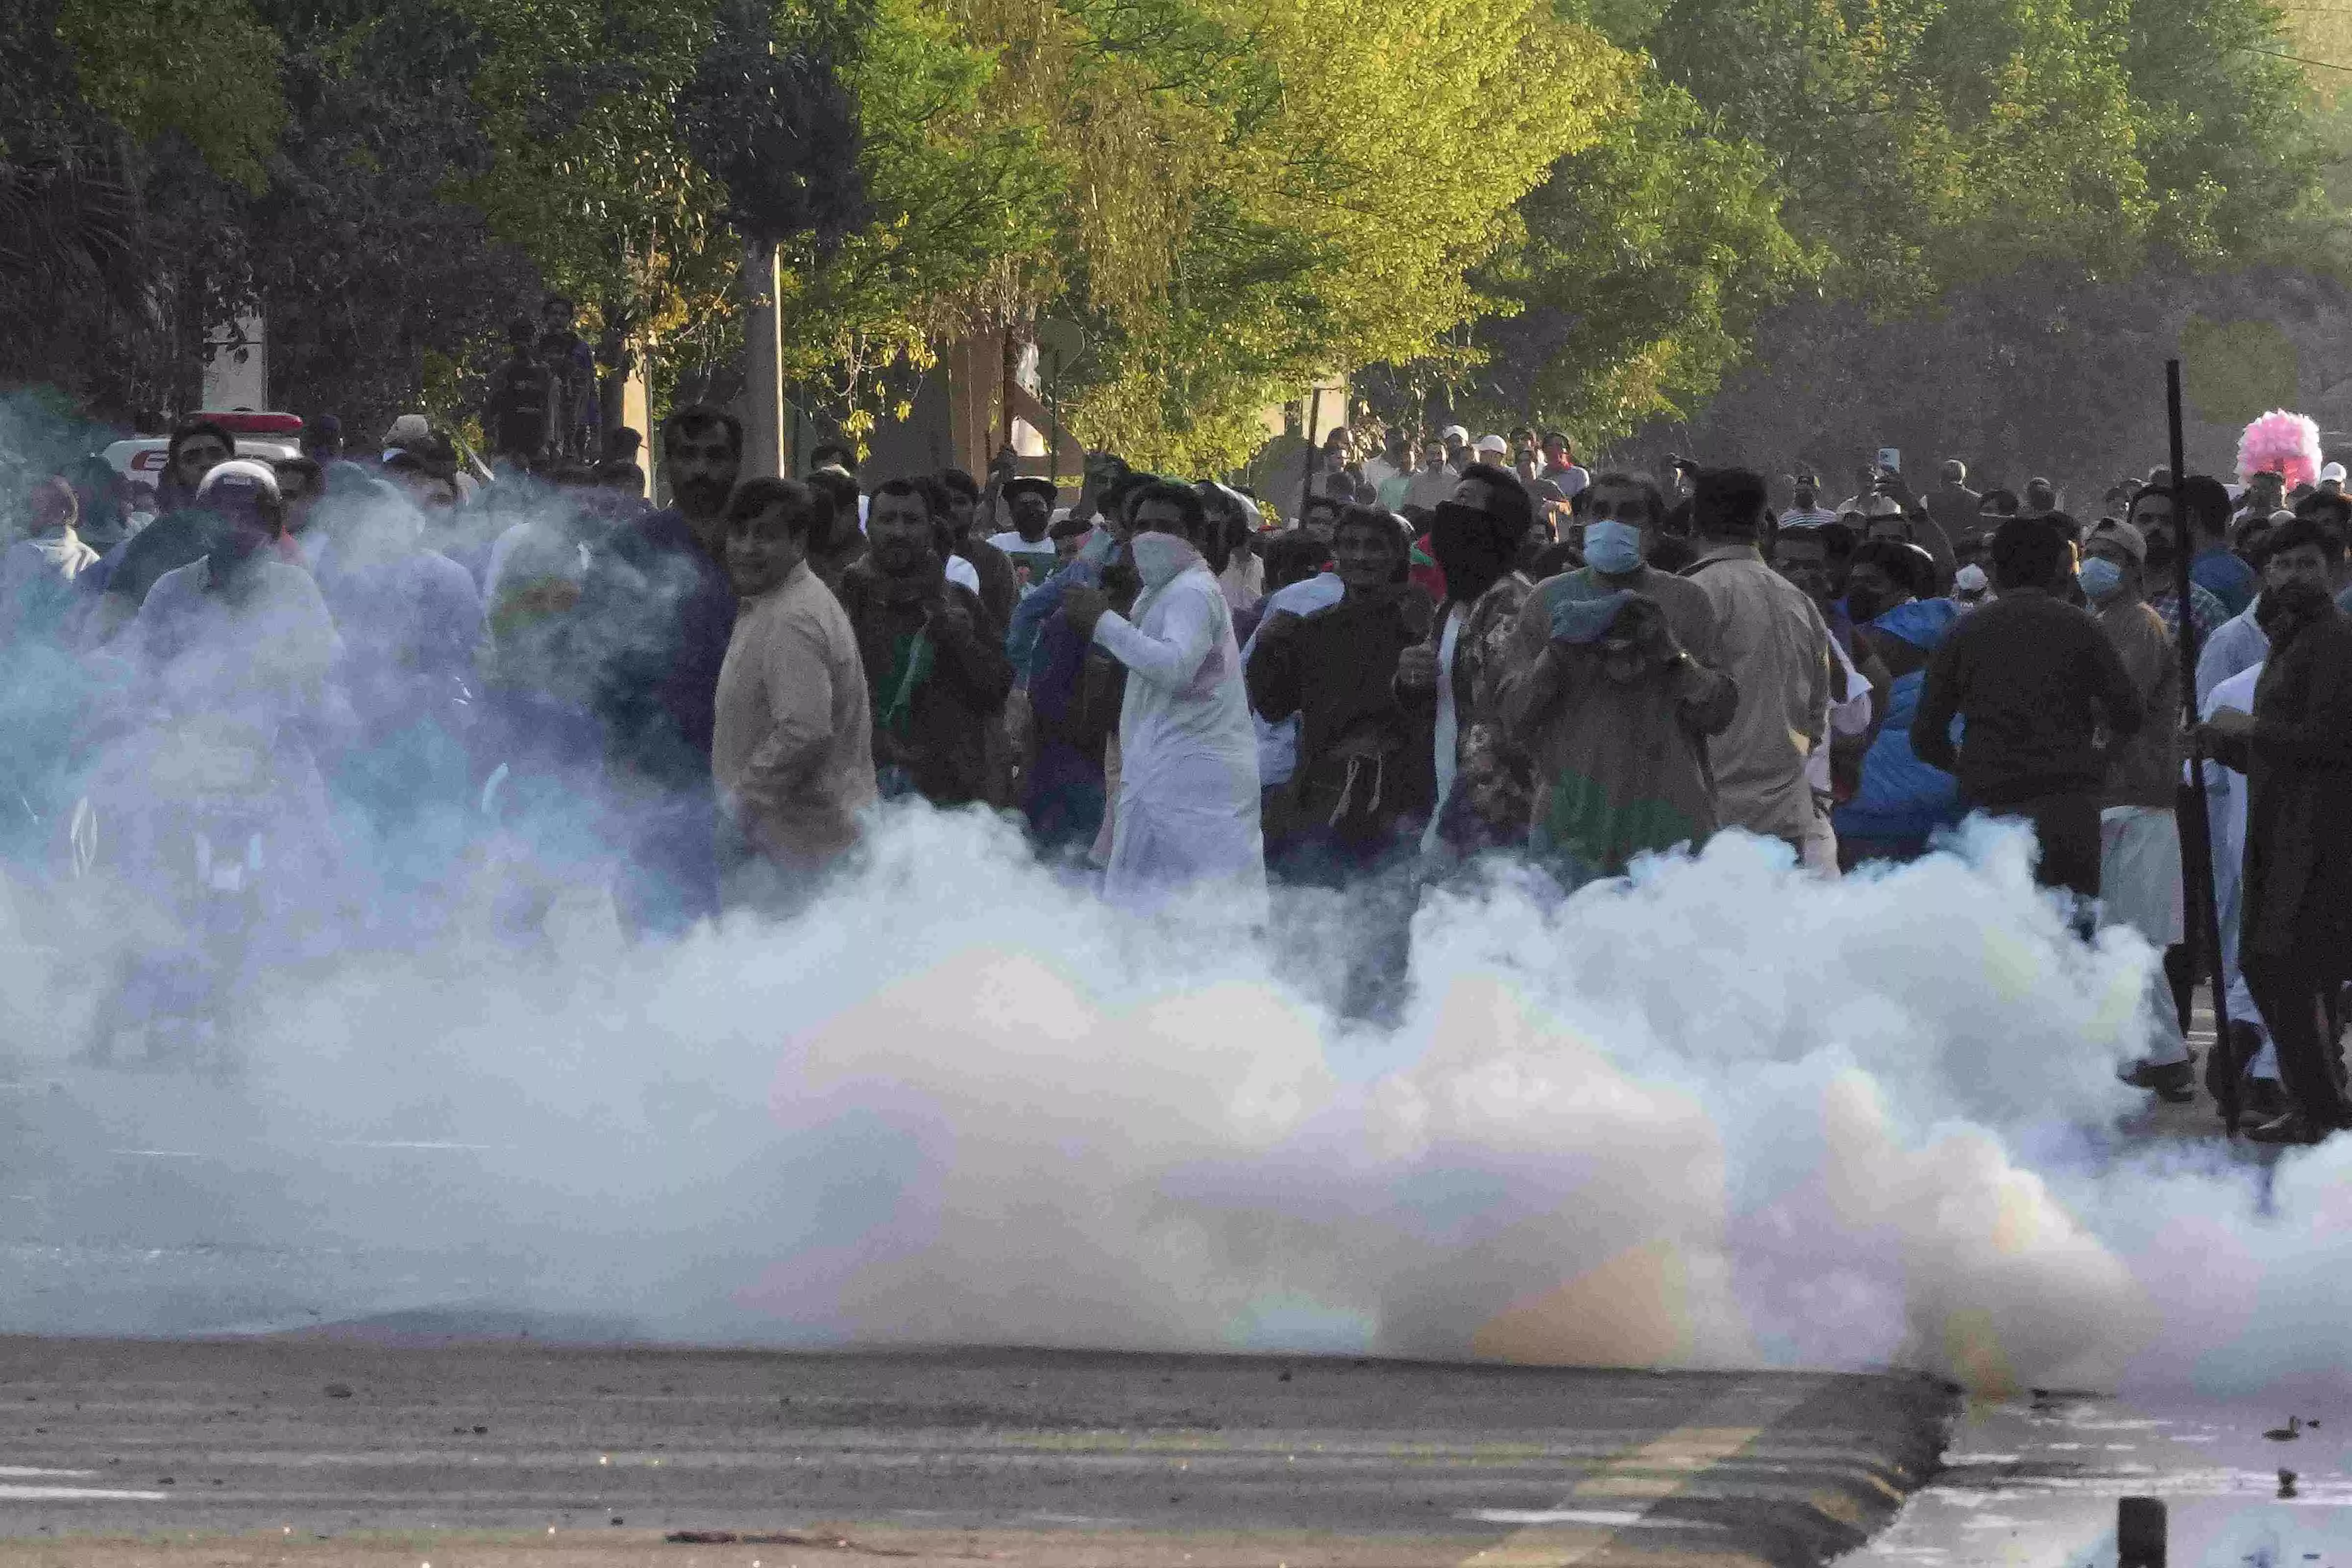 Police use water cannon, tear gas on Imran Khans supporters outside his residence in Lahore